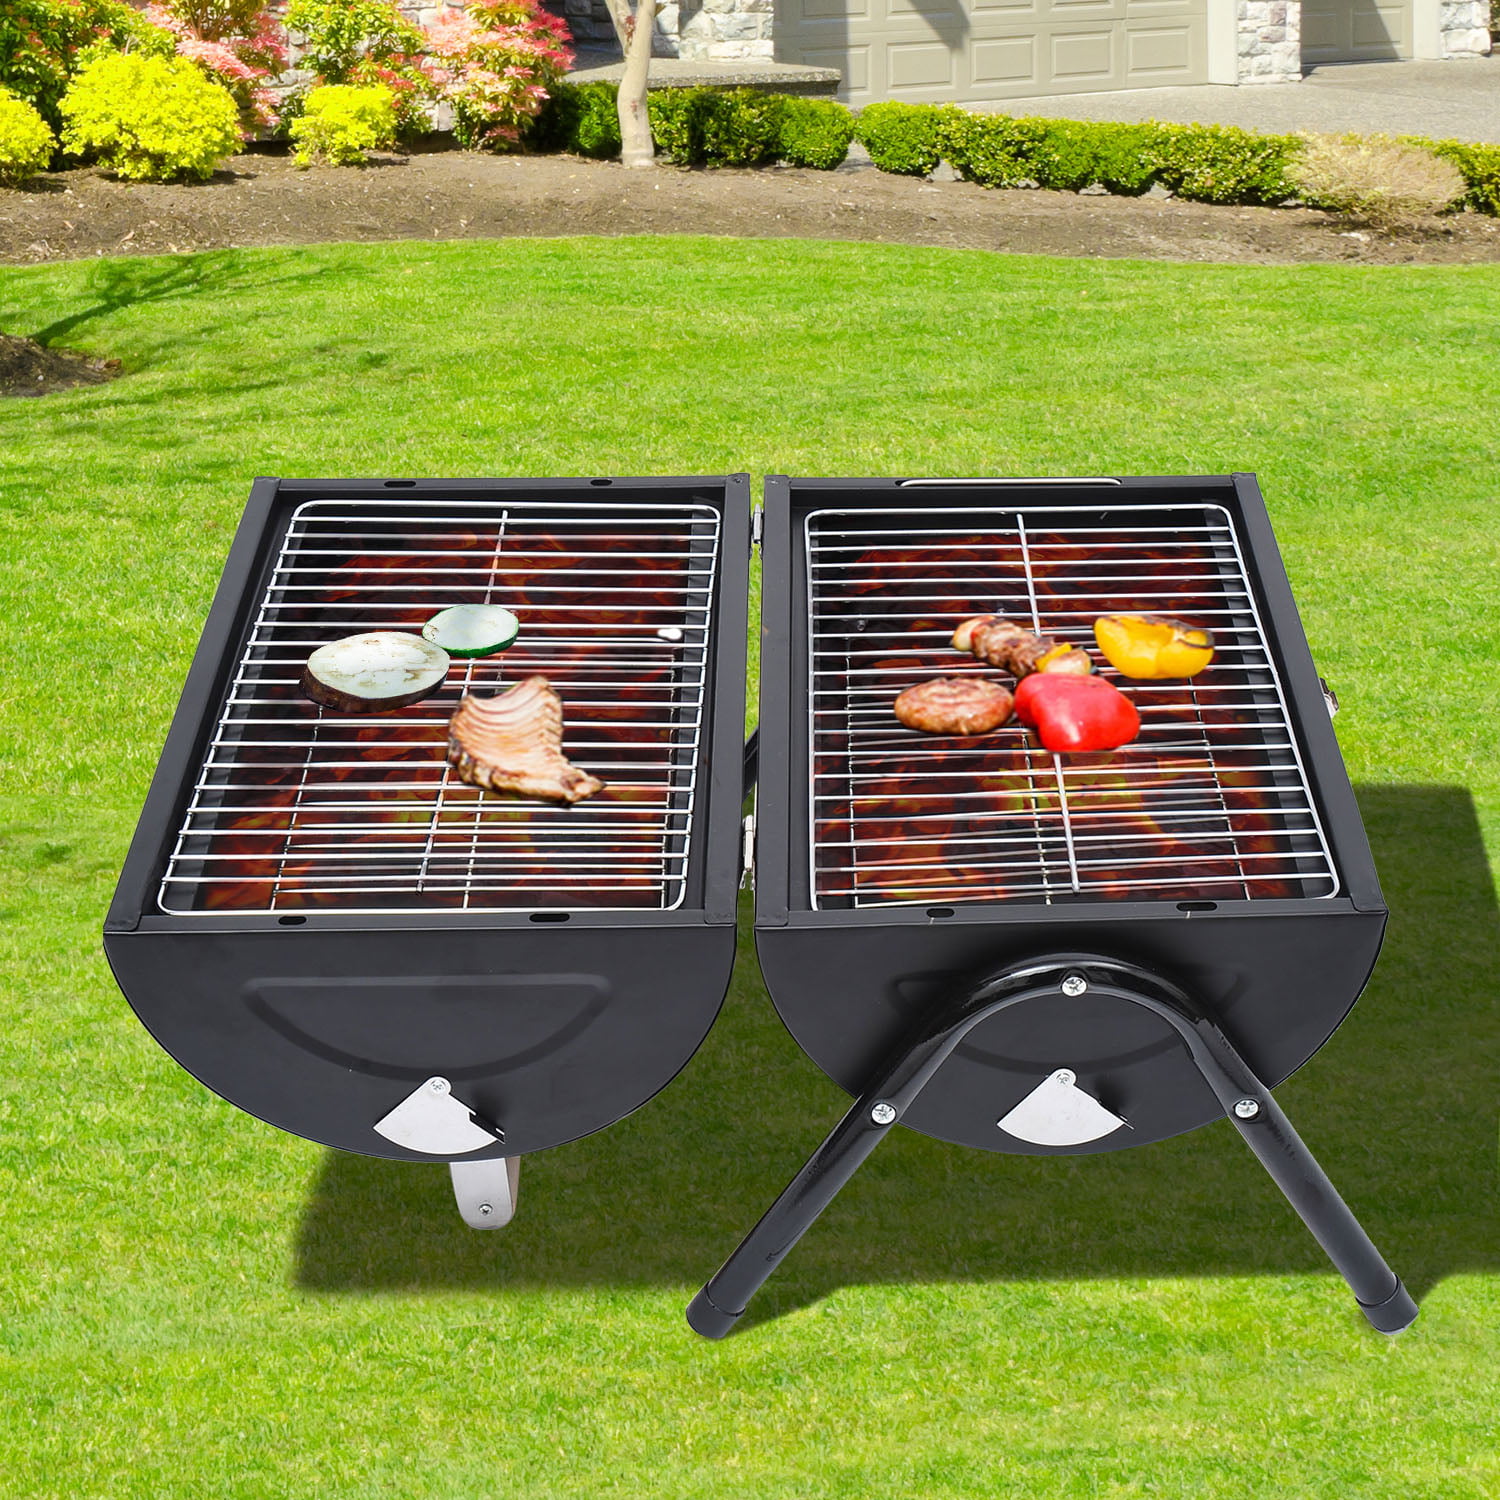 Barbecue Household Outdoor Outdoor Stainless Steel Barbecue Grill BBQ Carbon Grill Portable Folding Full Set of Barbecue Grills 